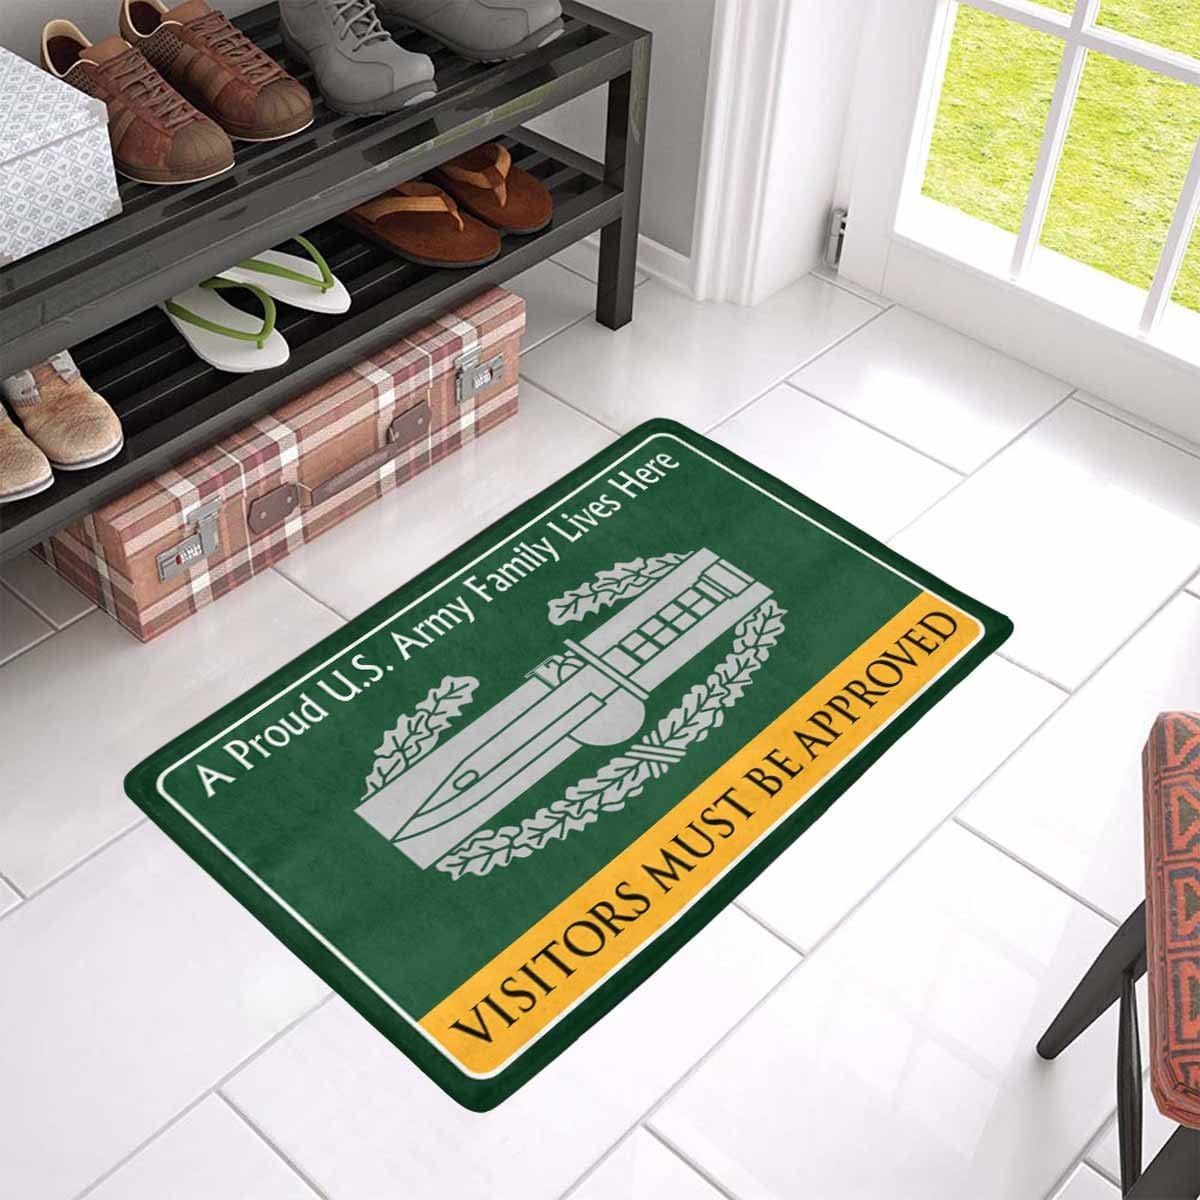 US Army Combat Action Badge Family Doormat - Visitors must be approved Doormat (23.6 inches x 15.7 inches)-Doormat-Army-Branch-Veterans Nation